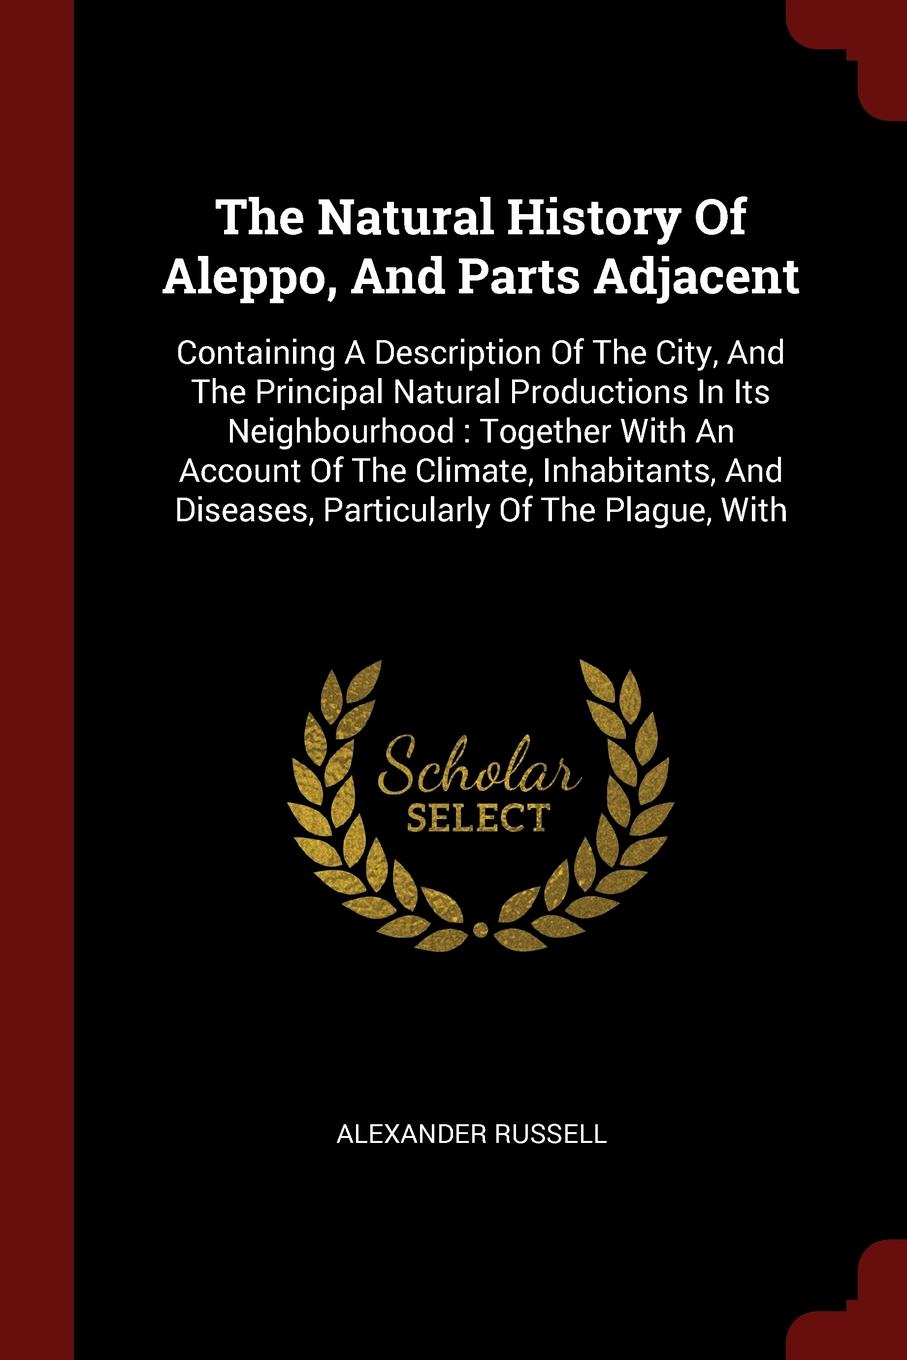 The Natural History Of Aleppo, And Parts Adjacent. Containing A Description Of The City, And The Principal Natural Productions In Its Neighbourhood : Together With An Account Of The Climate, Inhabitants, And Diseases, Particularly Of The Plague, With